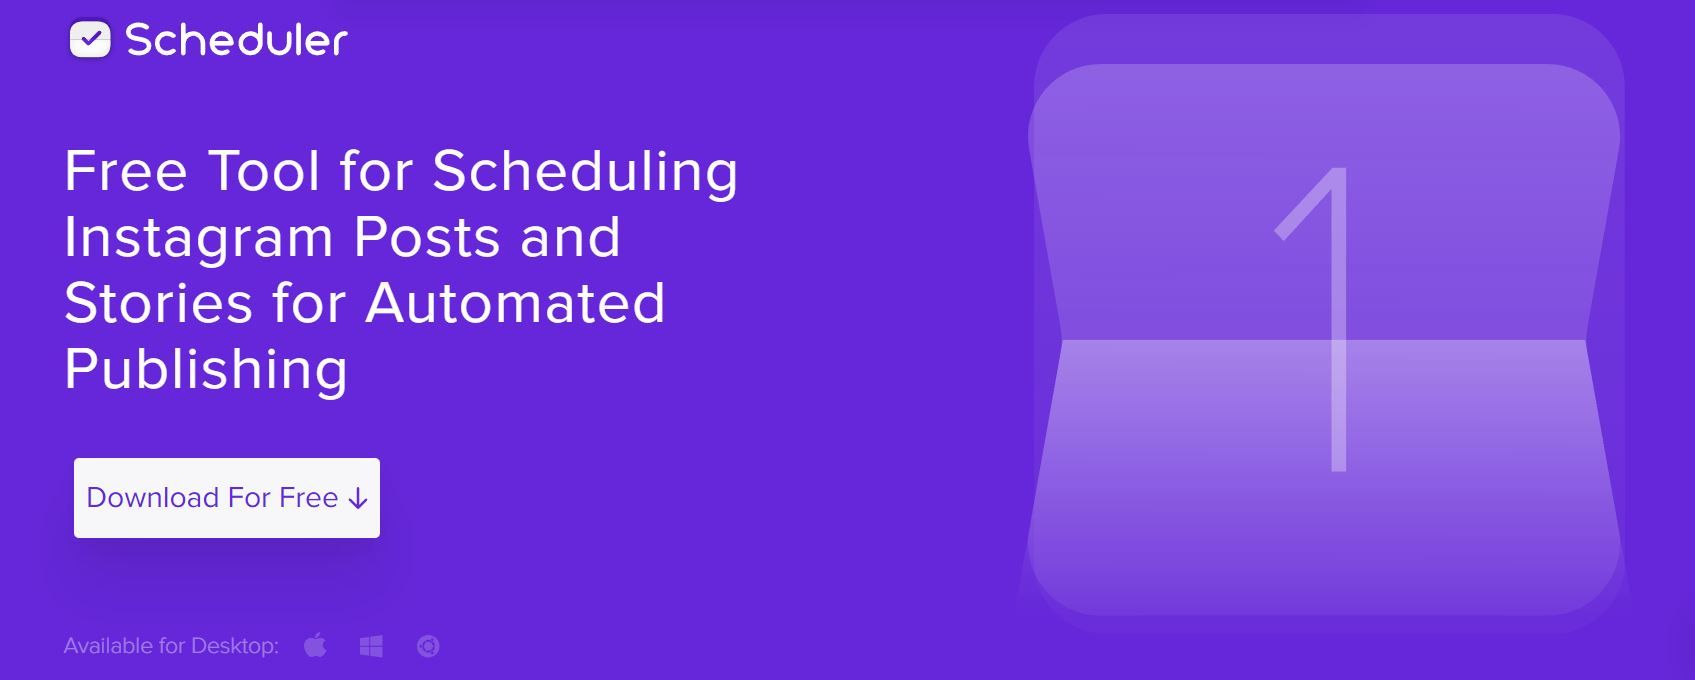 Combin Scheduler helps create Instagram posts, stories and schedule them ahead automatically